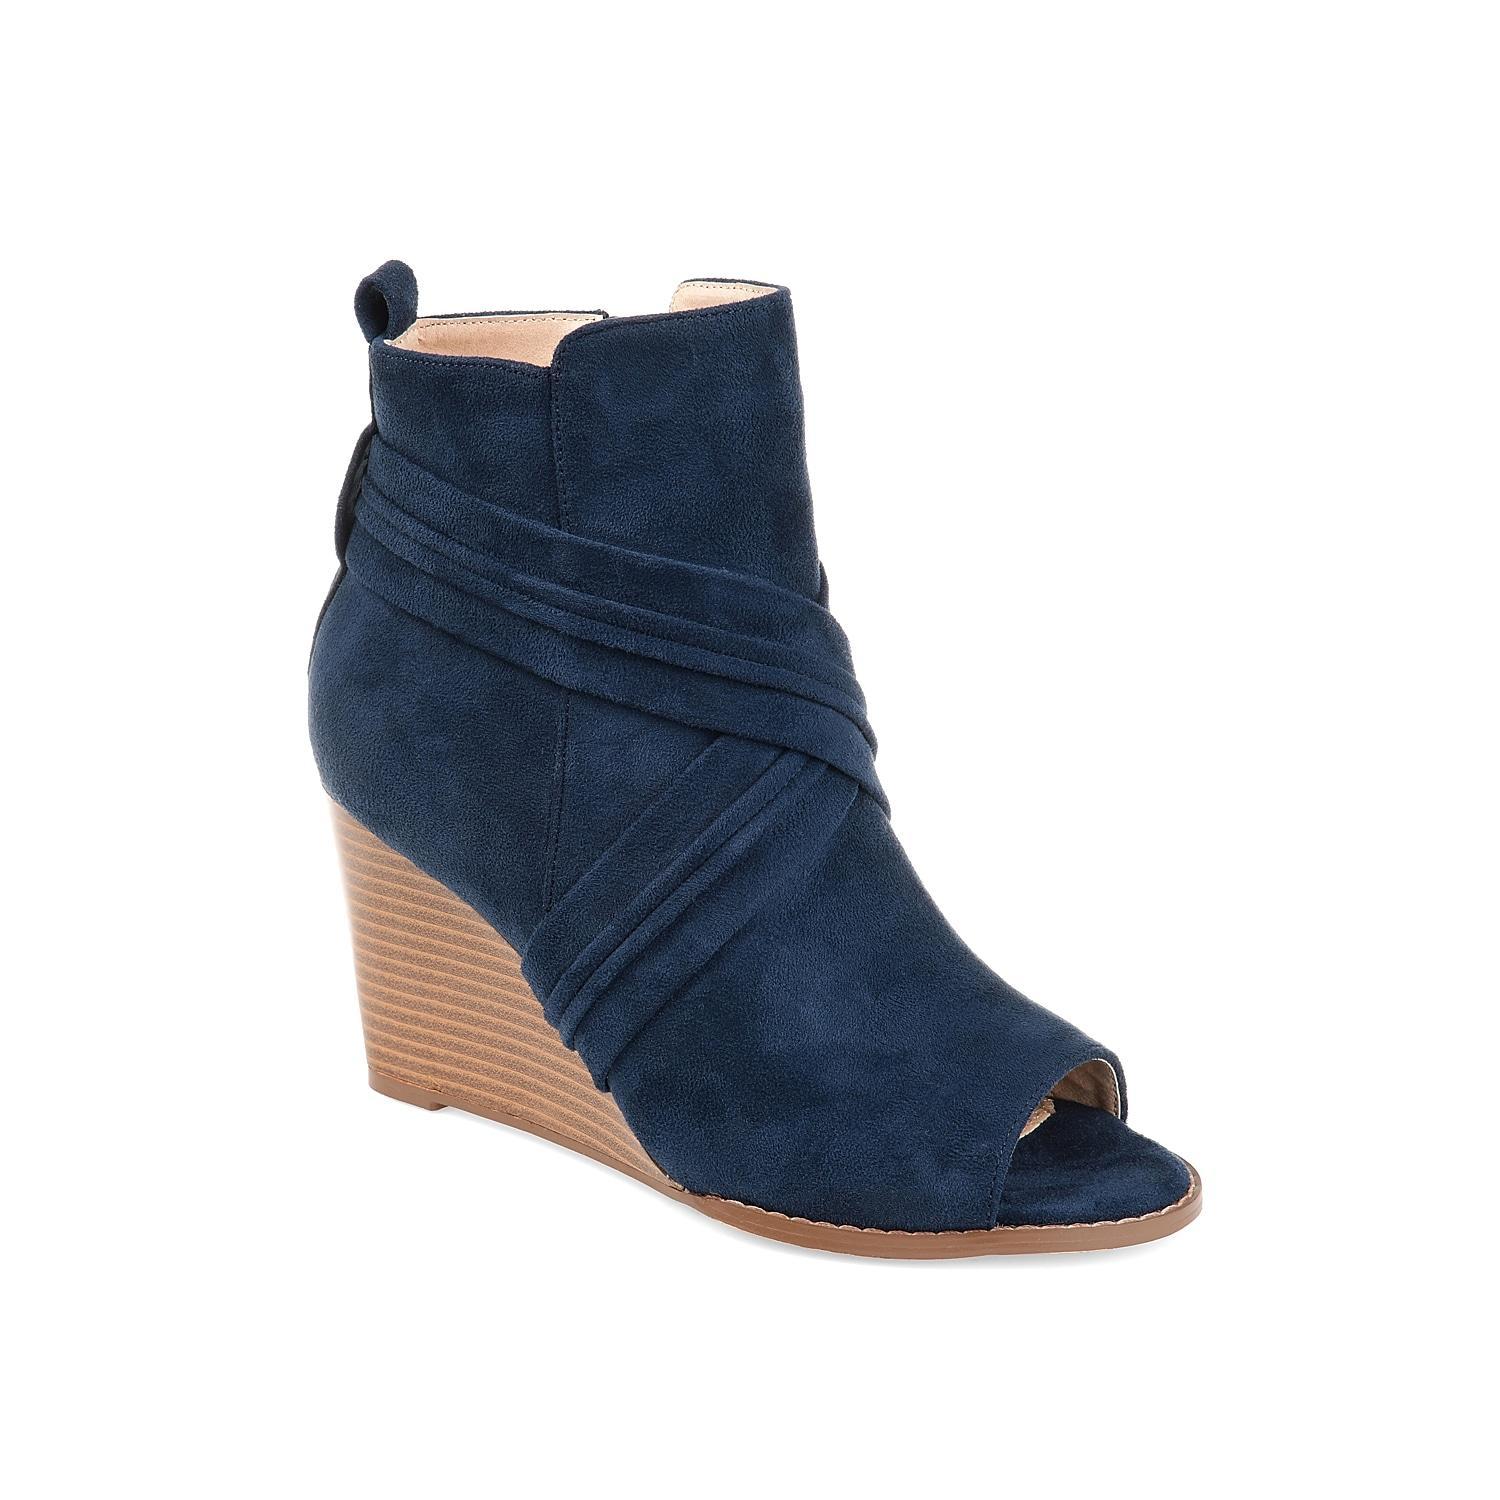 Journee Collection Sabeena Womens Wedge Ankle Boots Blue Product Image